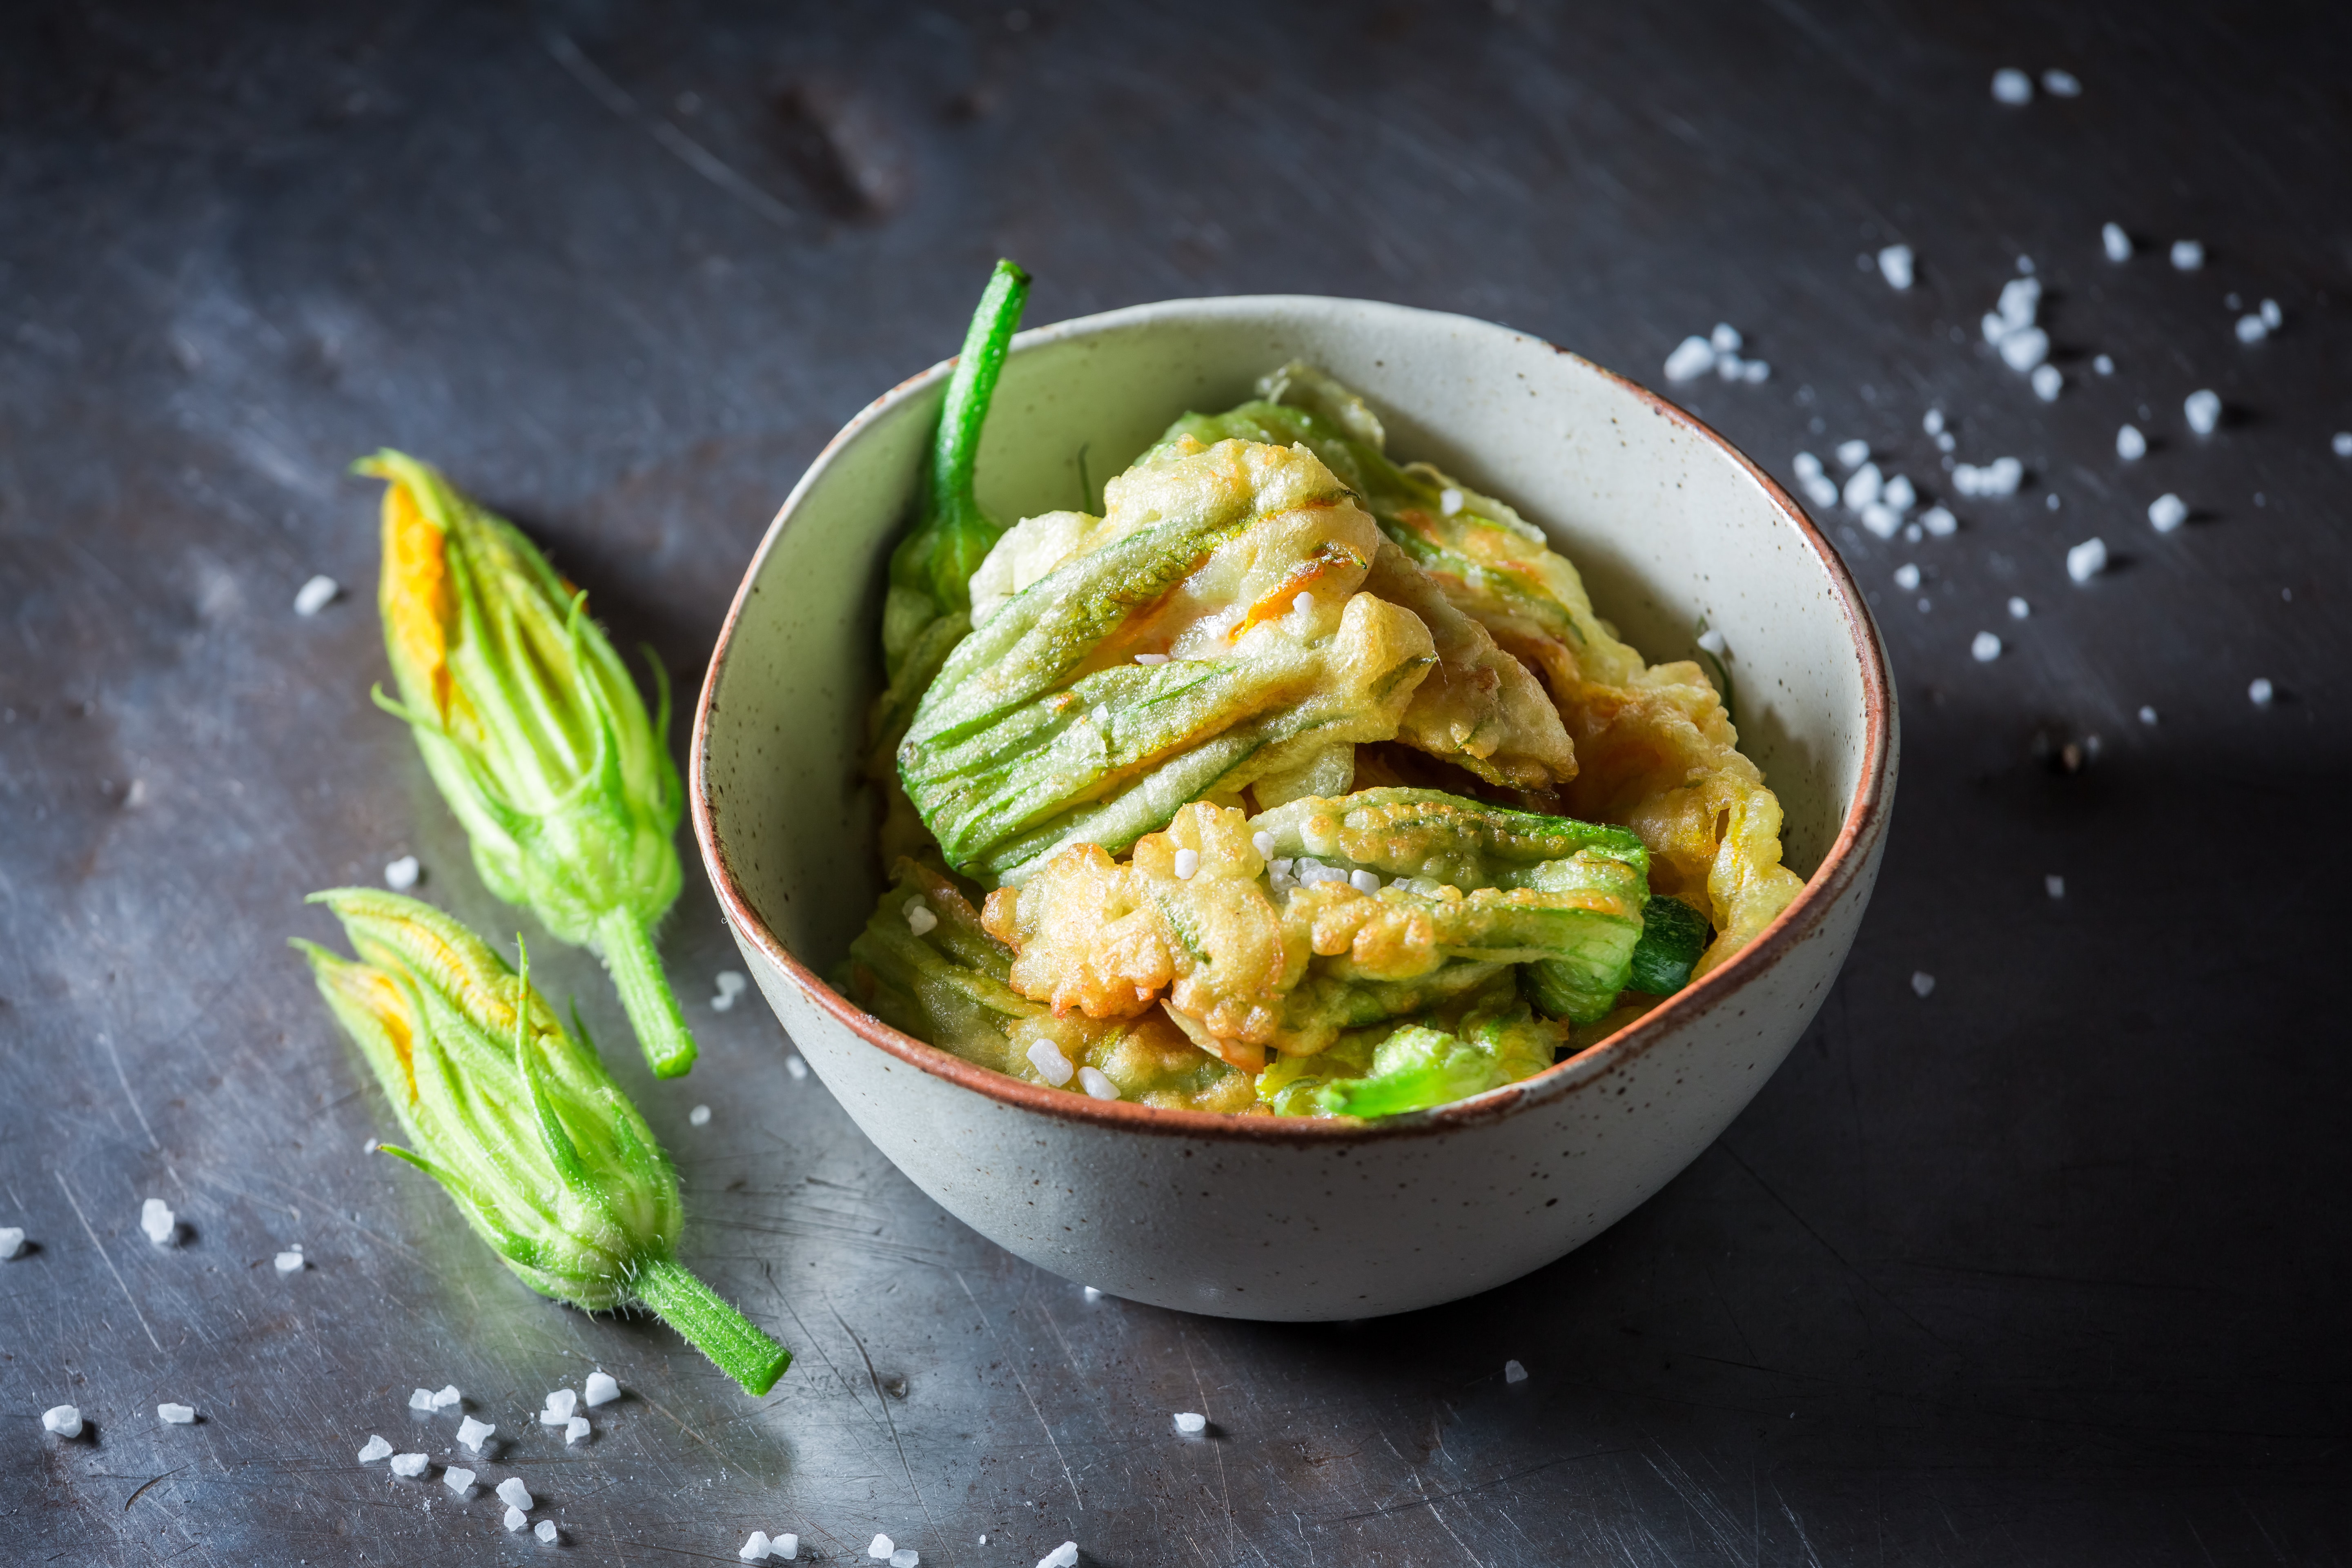 Homemade and tasty roasted zucchini flower served with salt